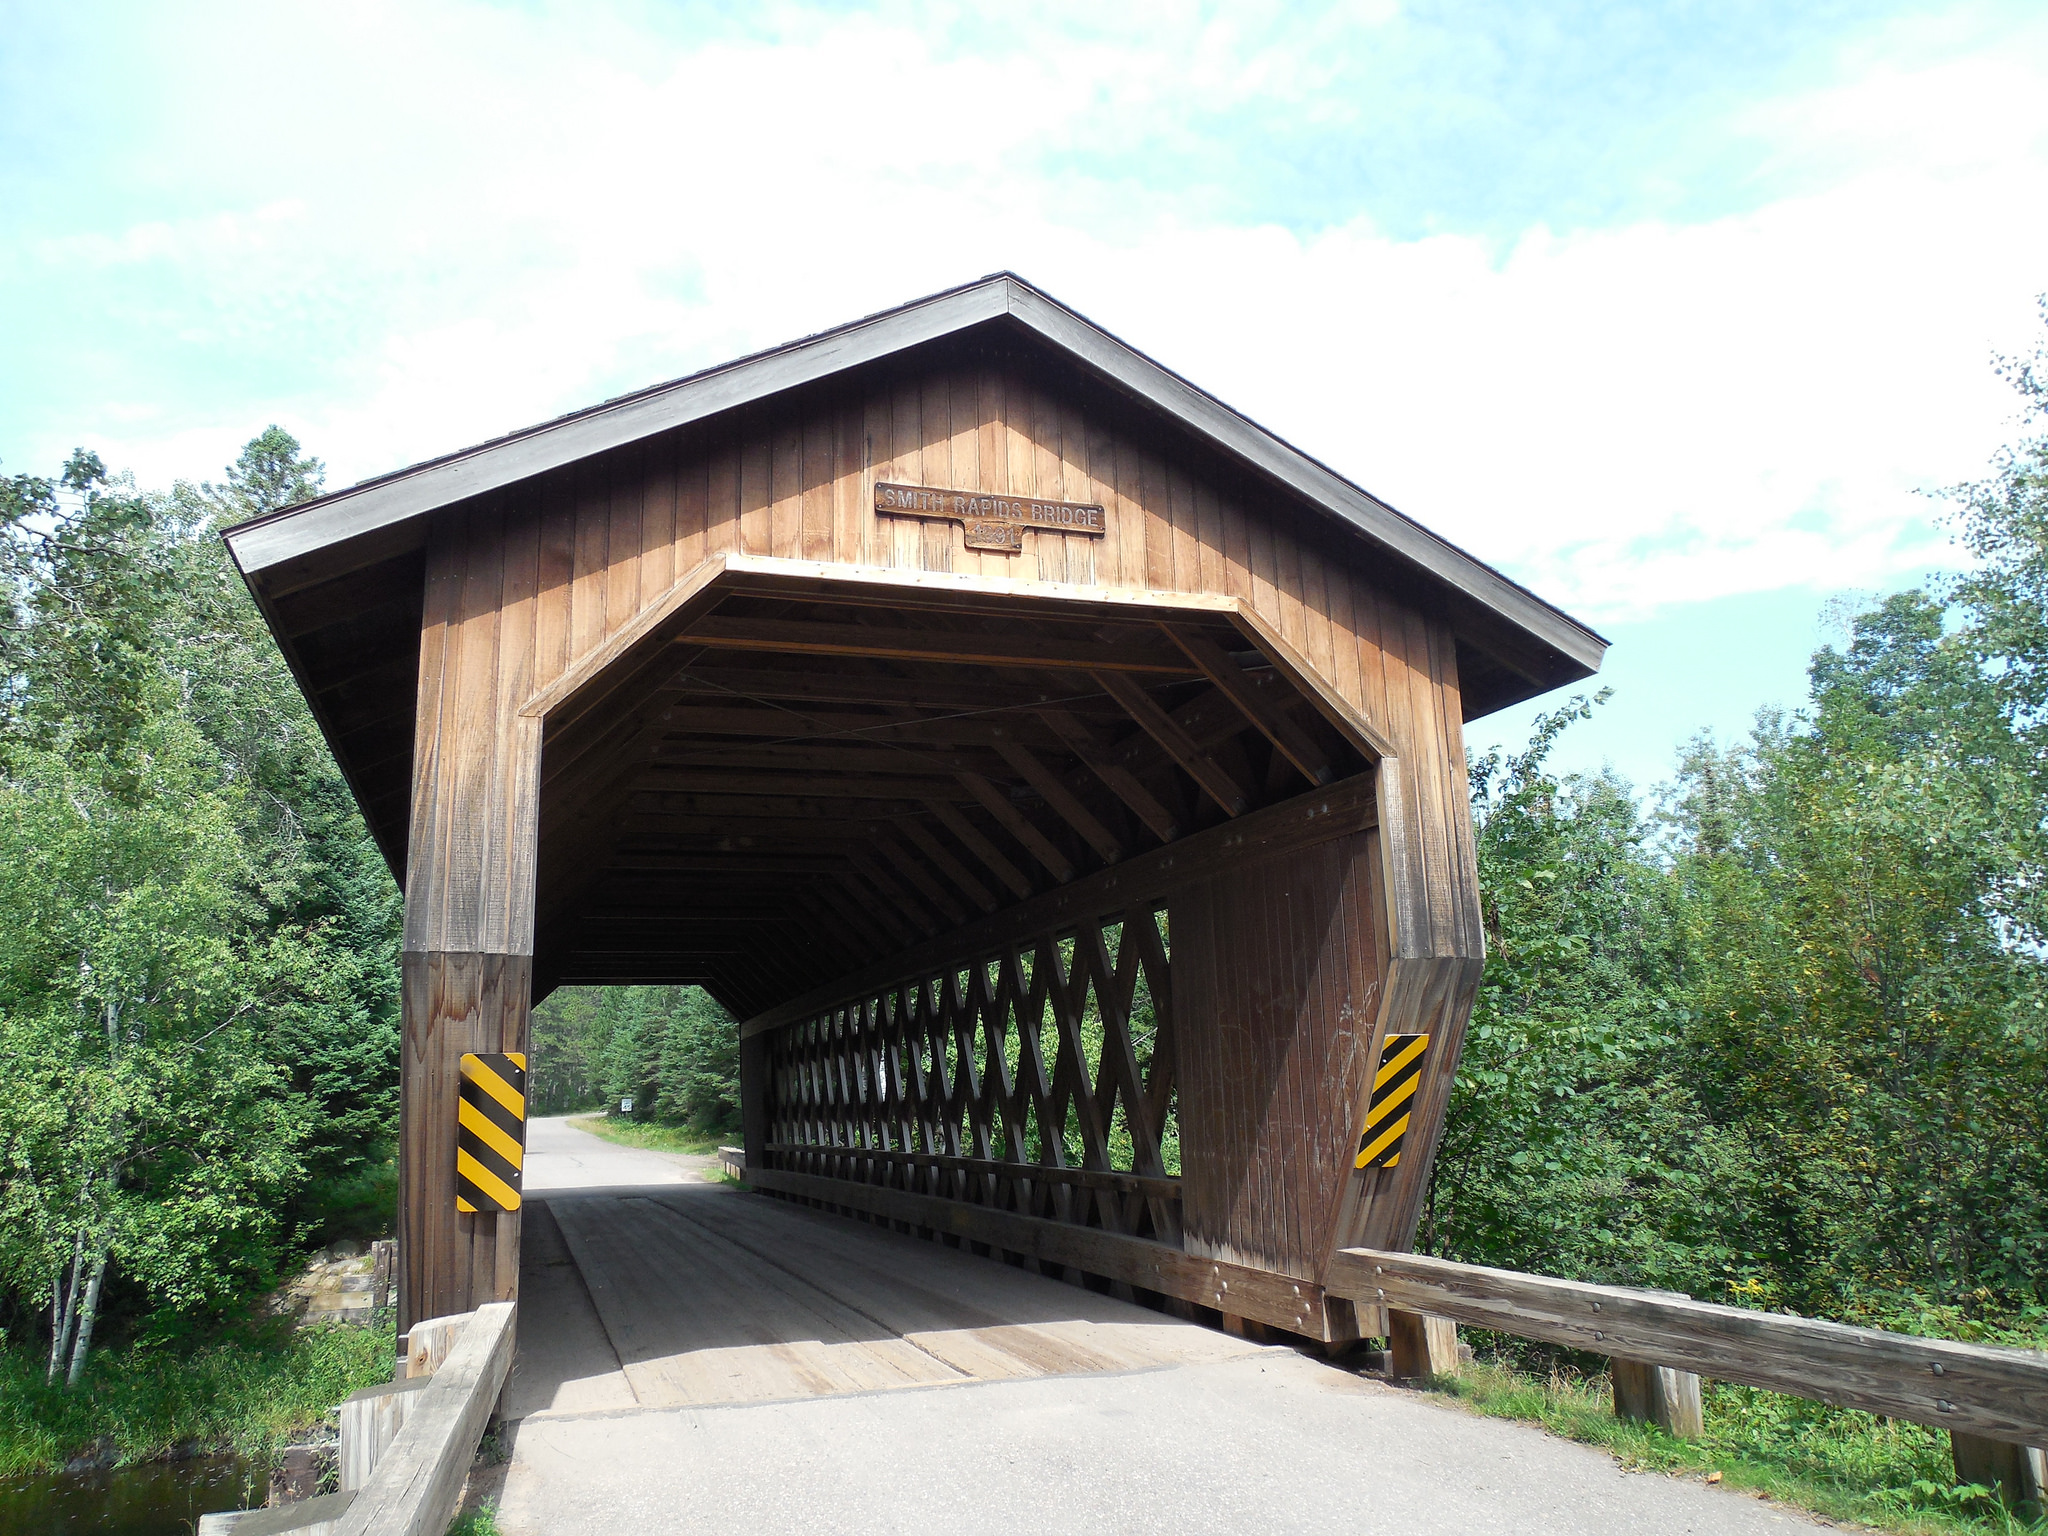 Smith Rapids Covered Bridge - Wisconsin by Dougtone, on Flickr